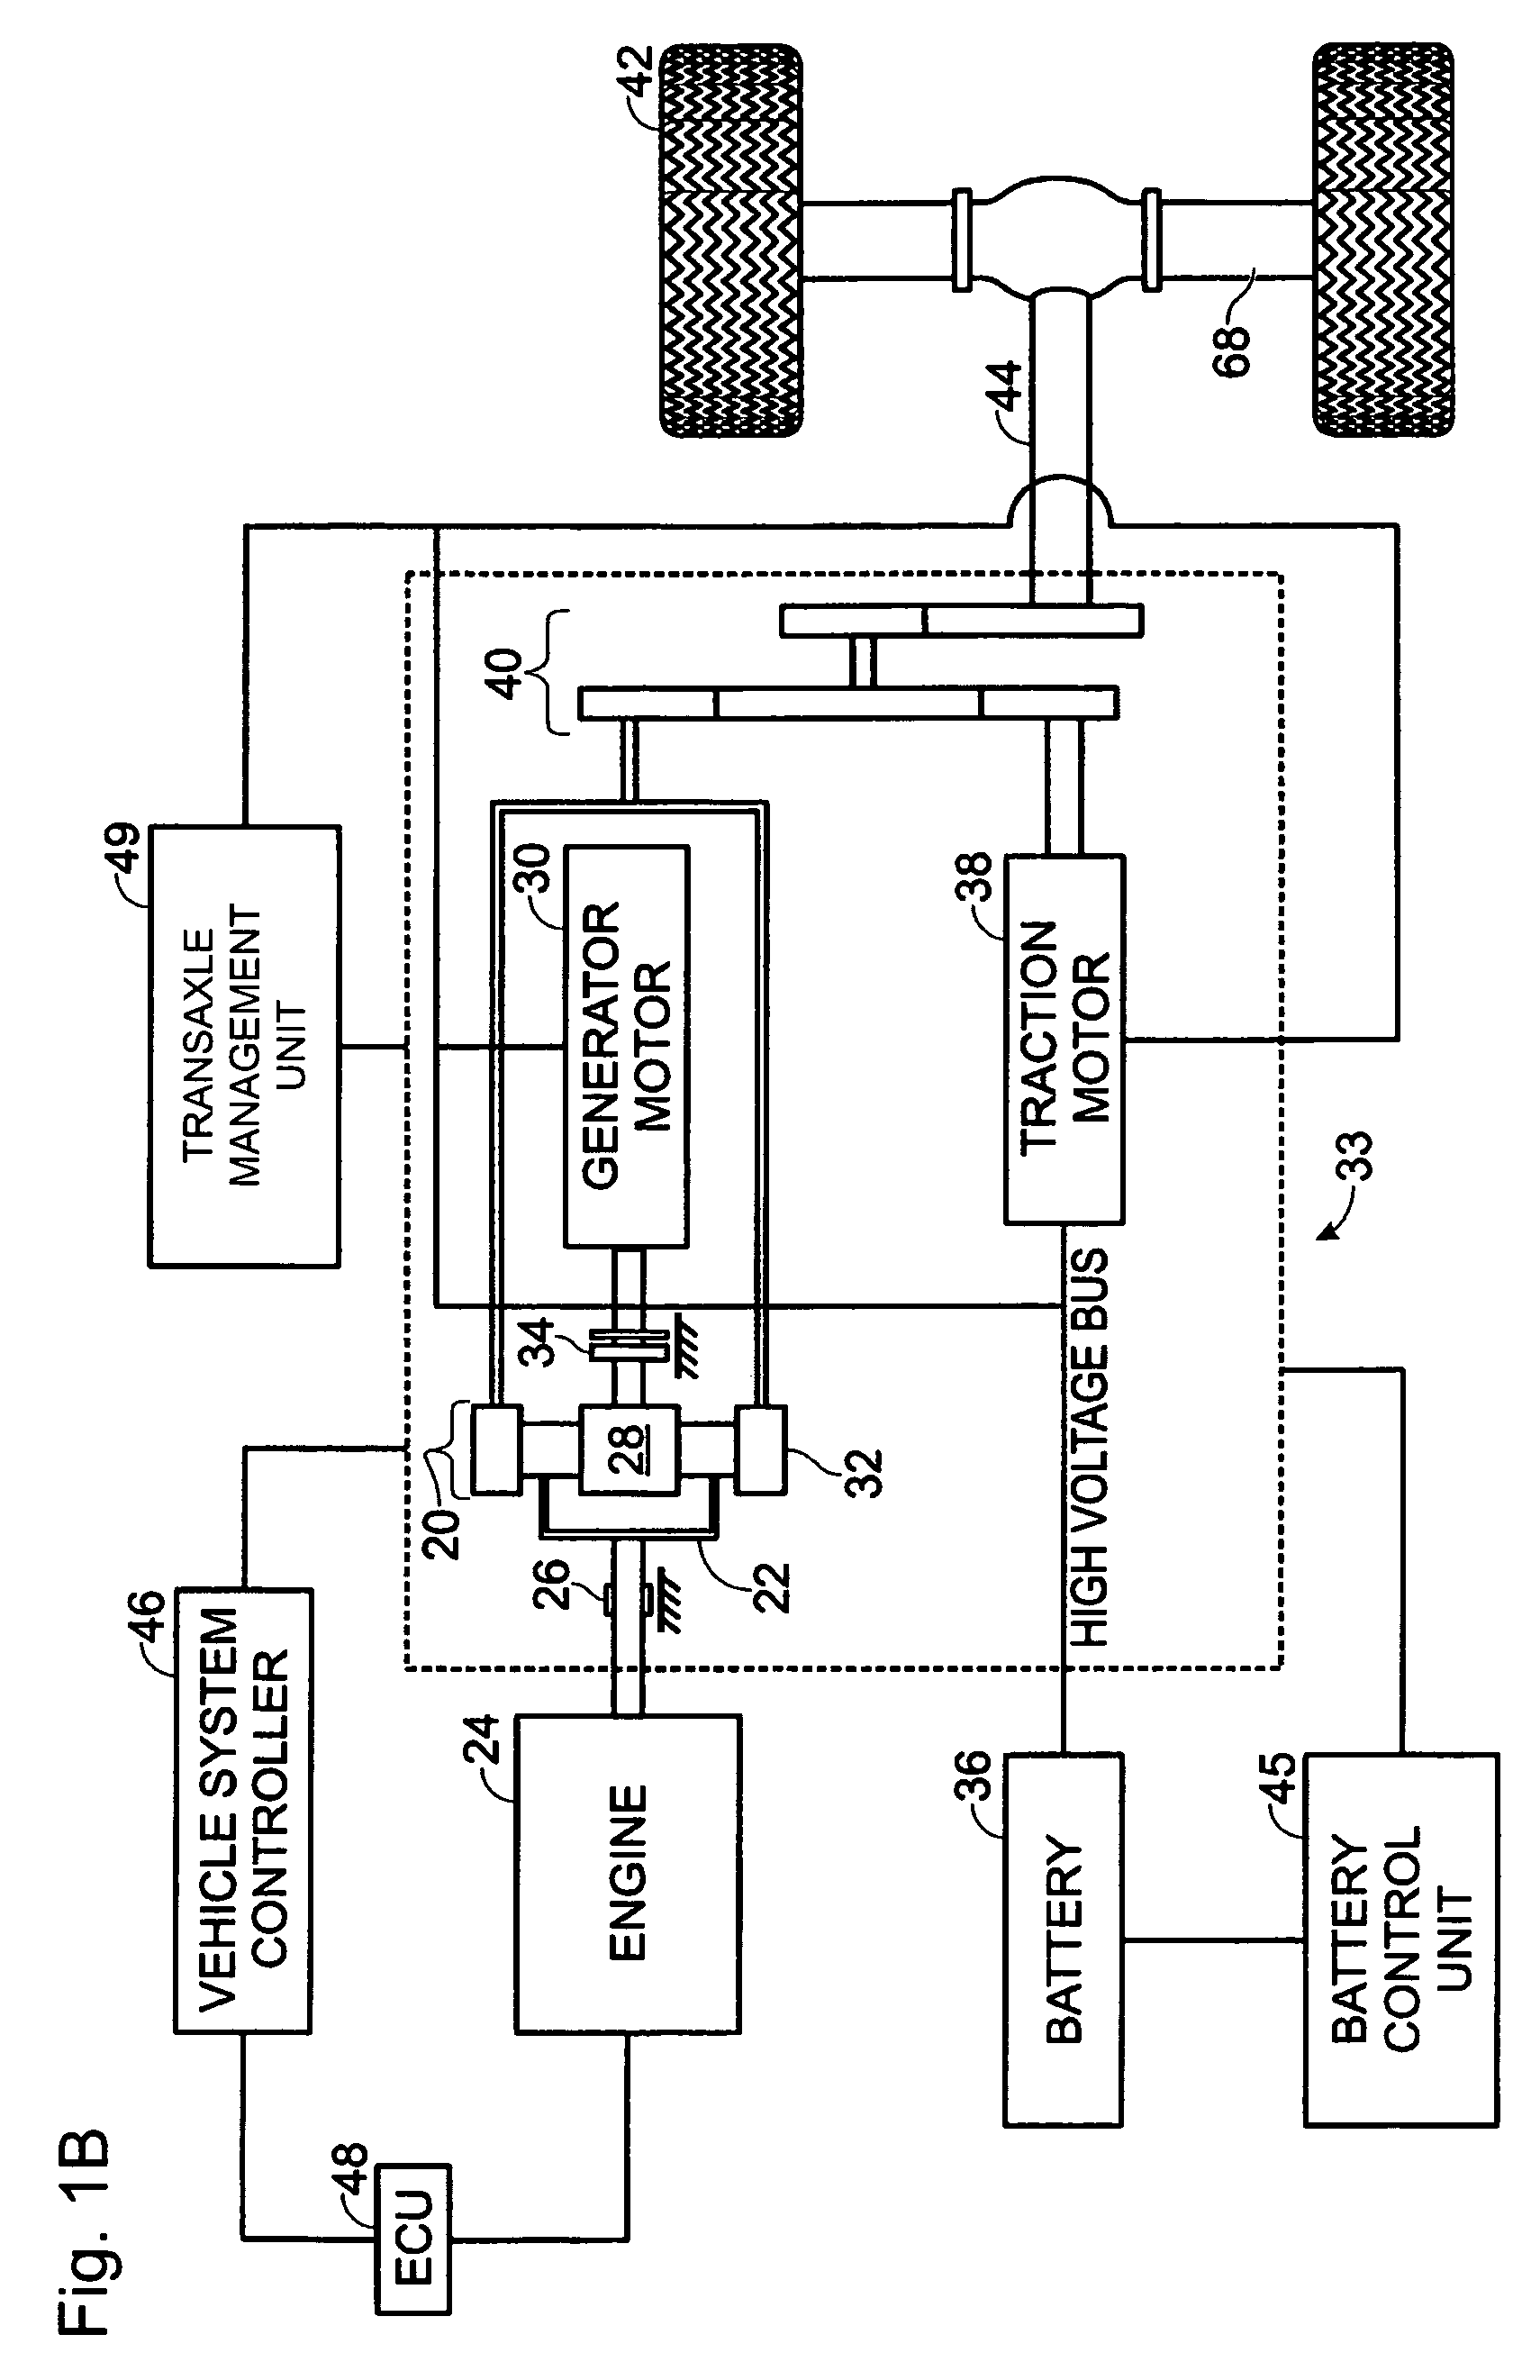 System and method for controlling vehicle operation